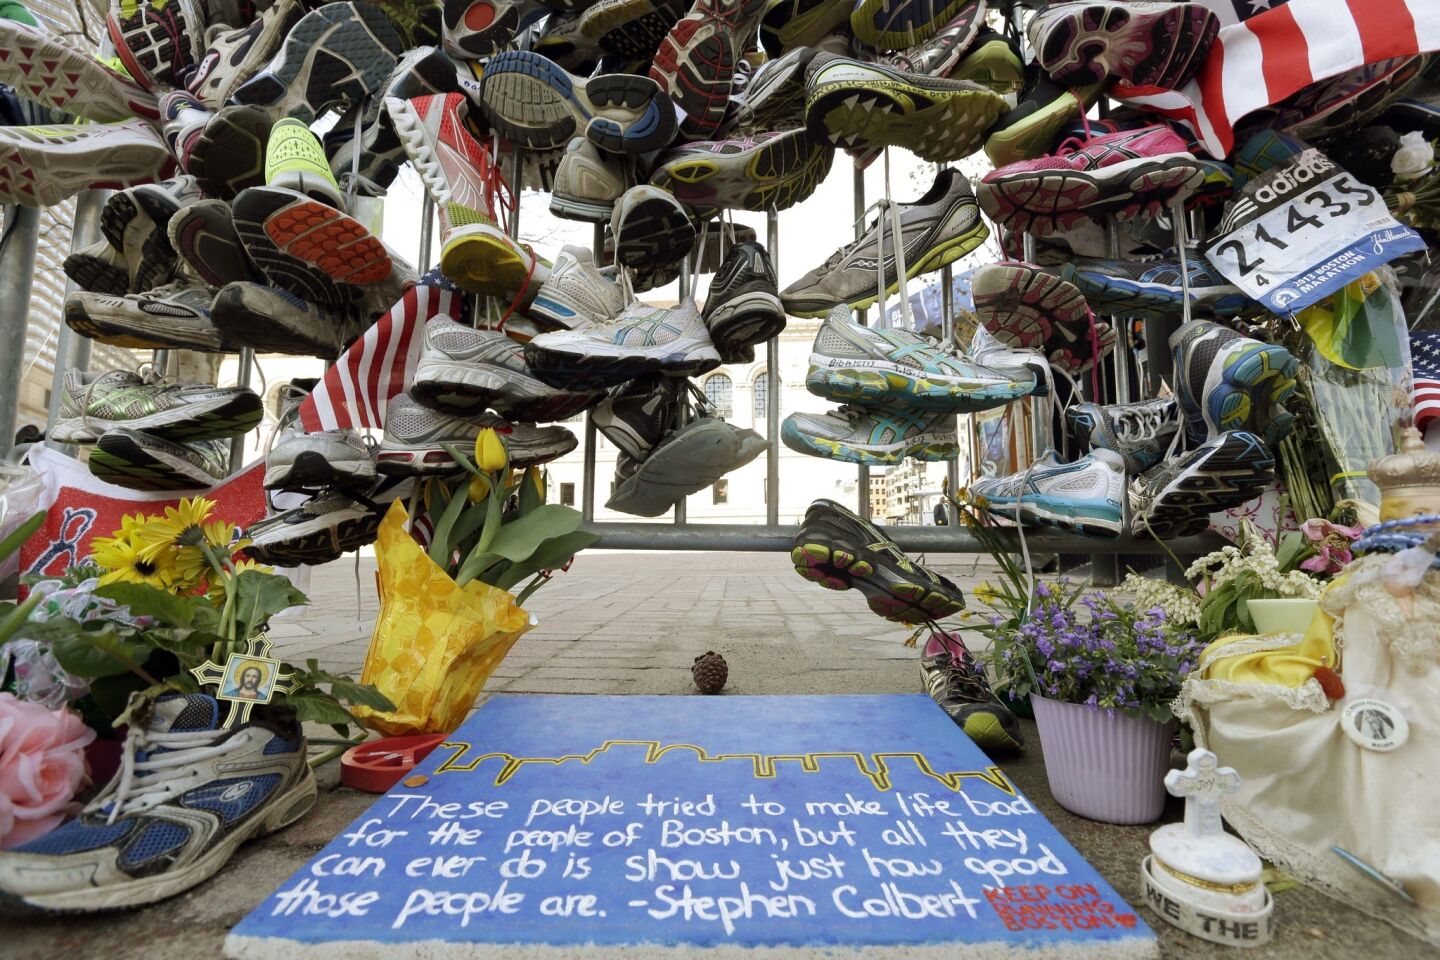 Running shoes and other items adorn a makeshift memorial to bombing victims near the Boston Marathon finish line in Boston's Copley Square, in an April 25, 2013, image.